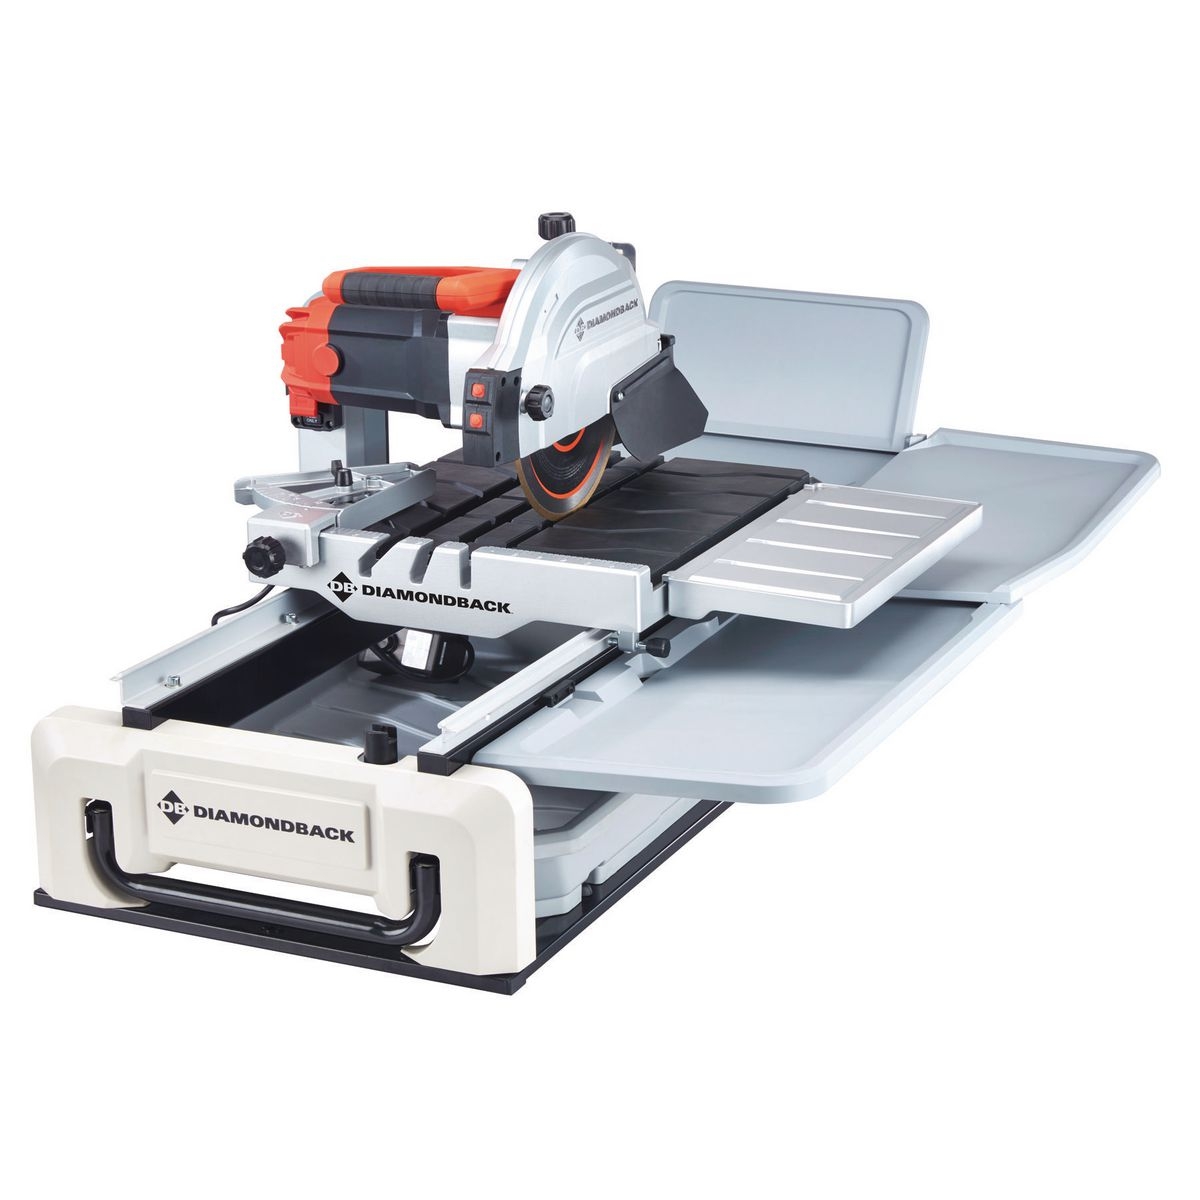 DIAMONDBACK 15 Amp 10 in. Wet Tile Saw with Sliding Table and Extended